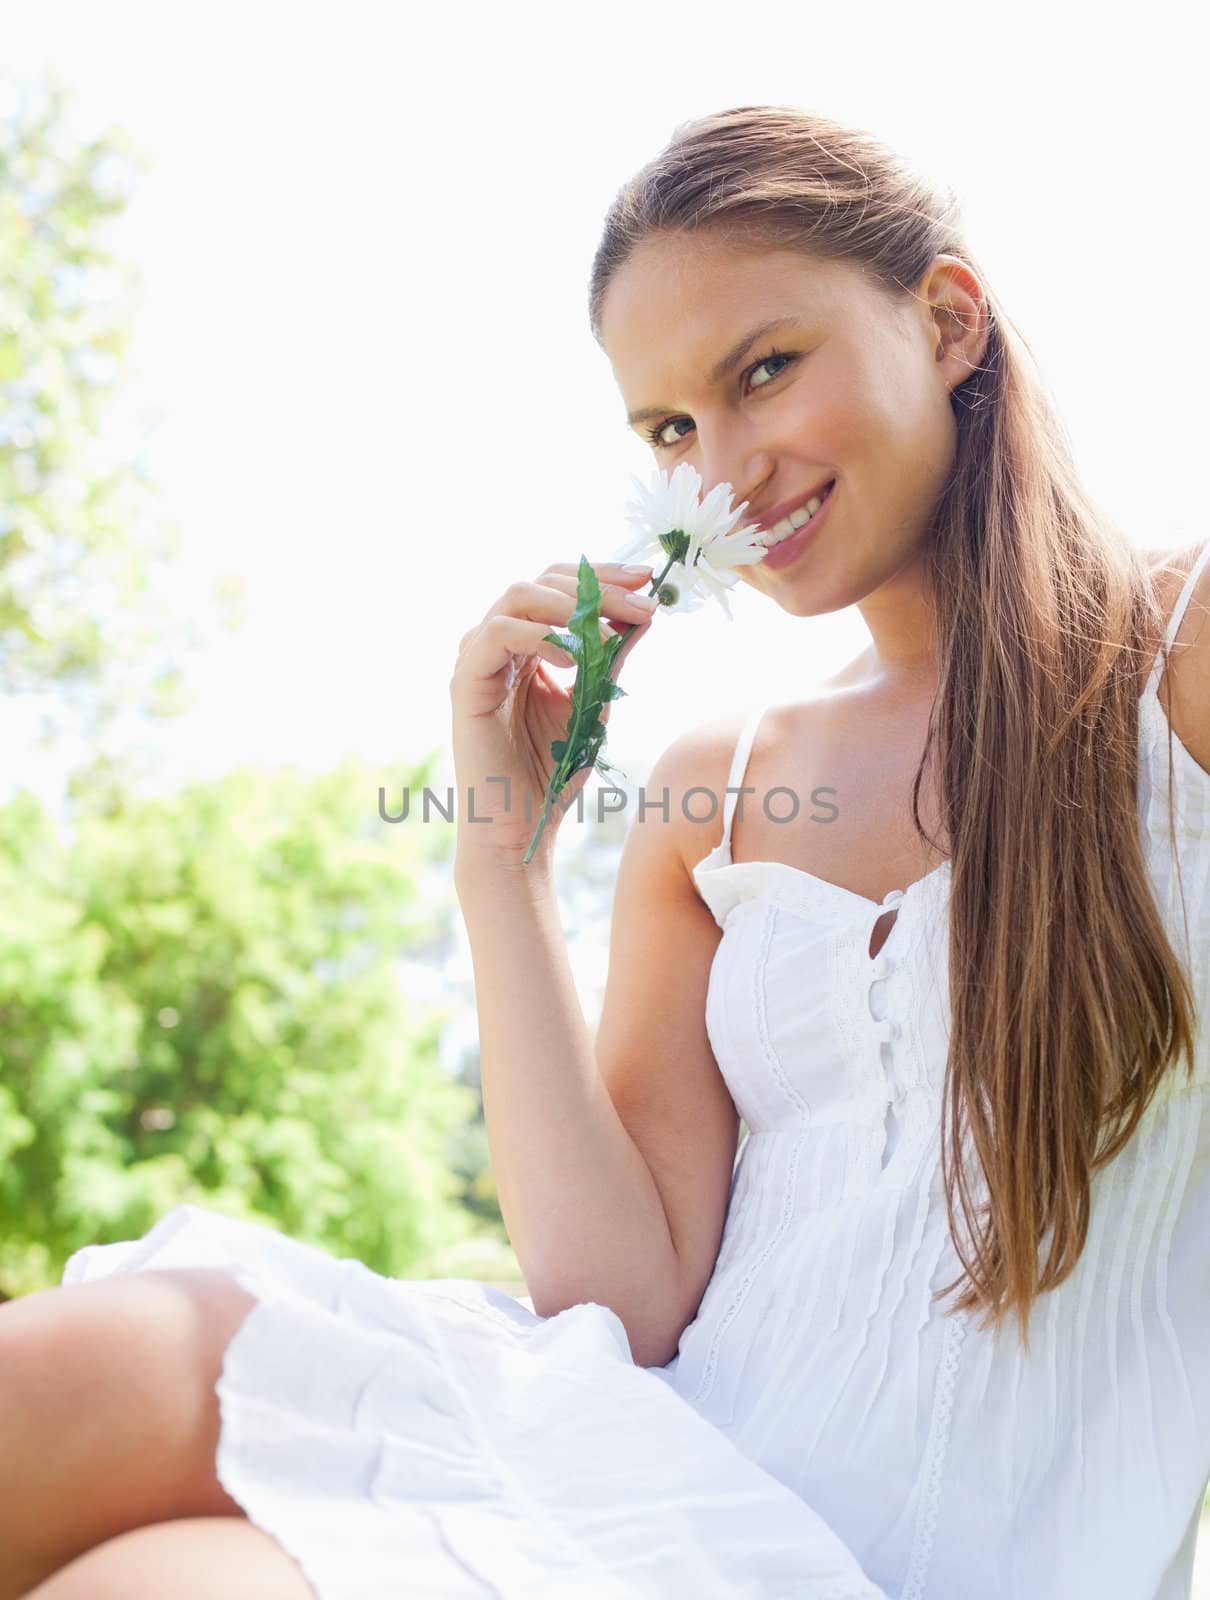 Smiling woman in the park smelling a flower by Wavebreakmedia